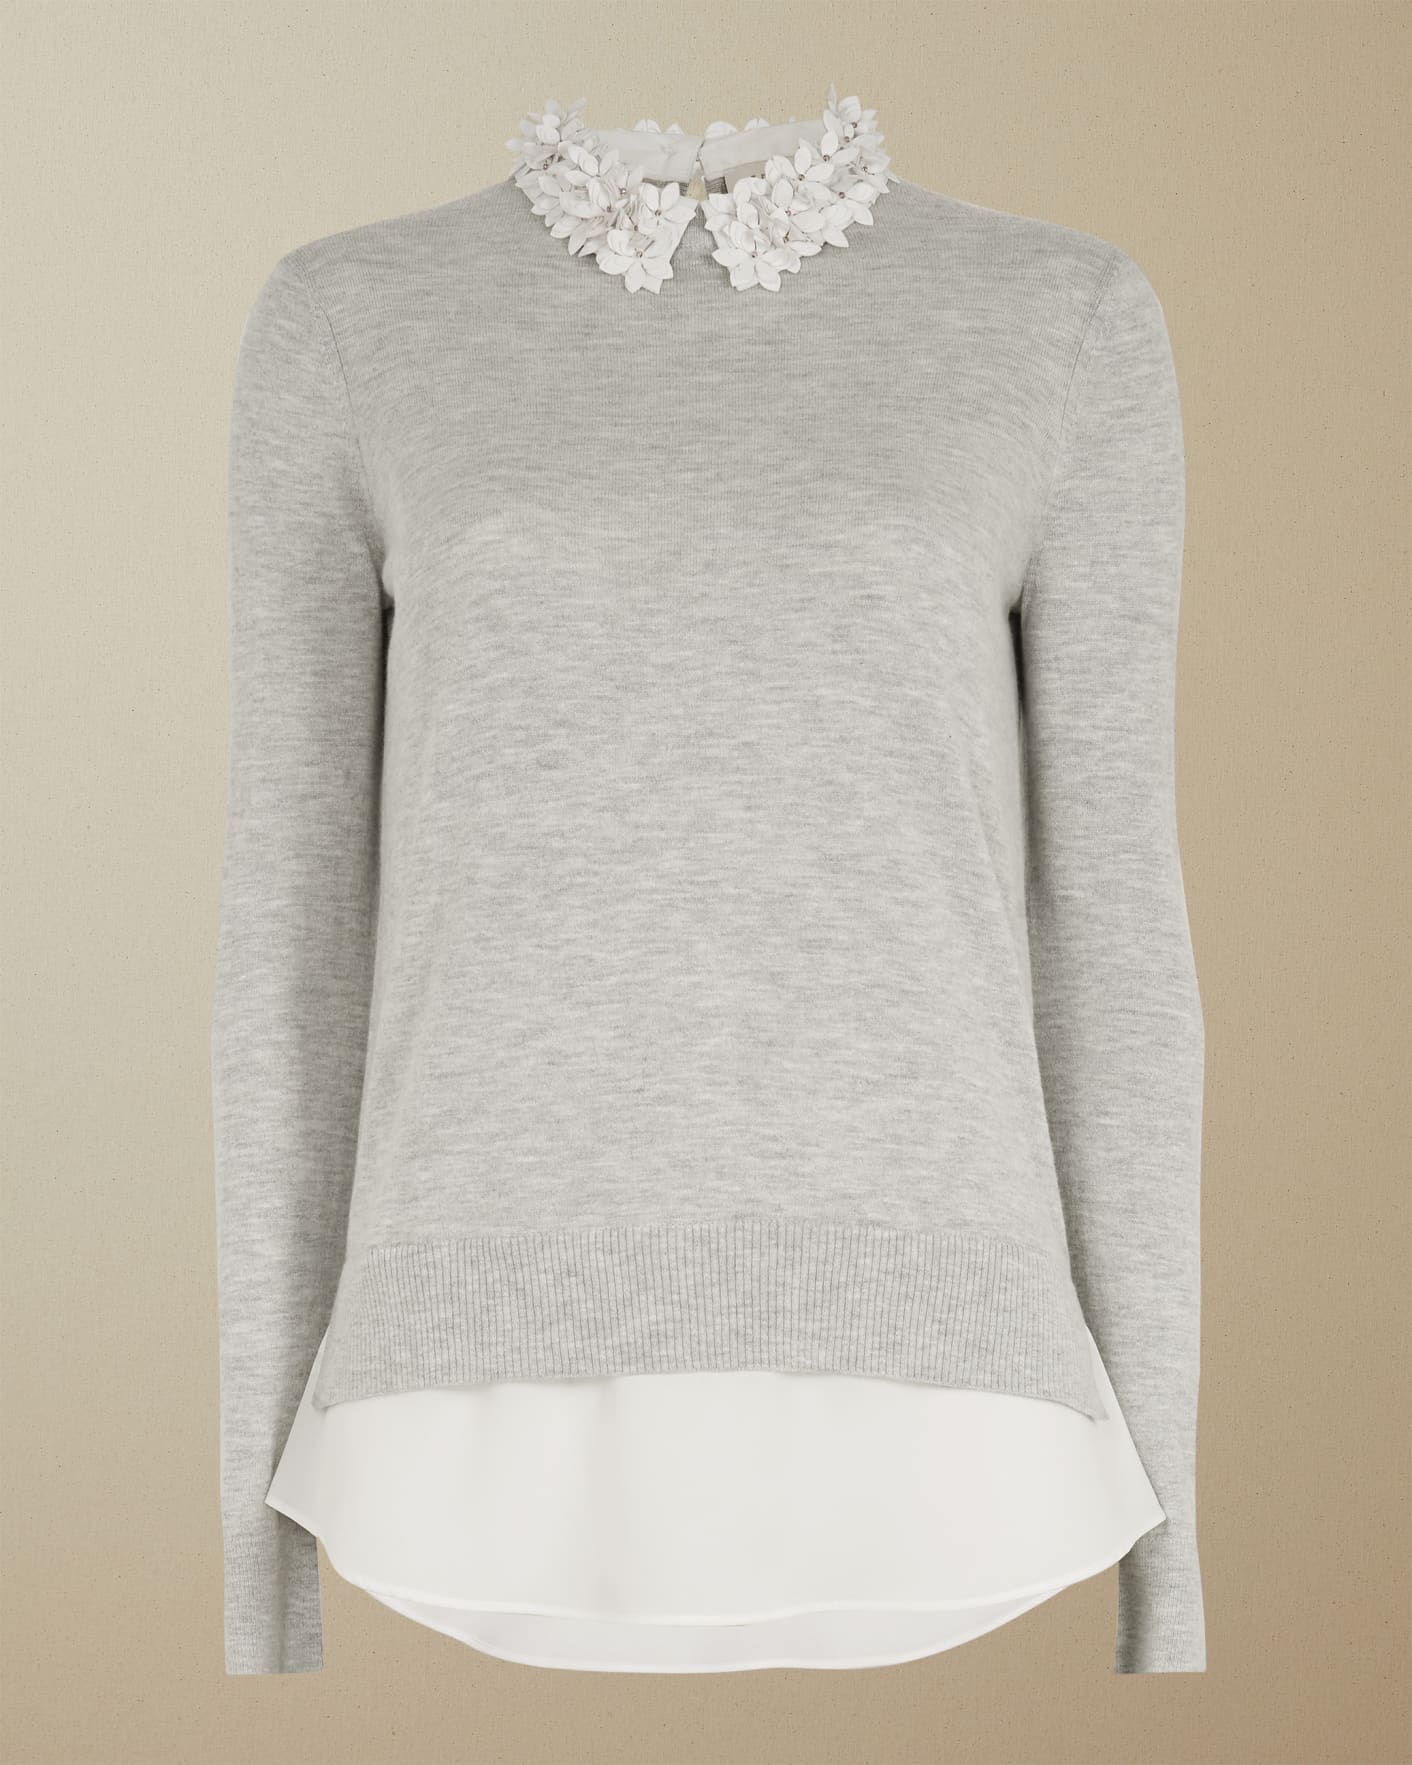 Gray Floral collar mockable sweater Ted Baker